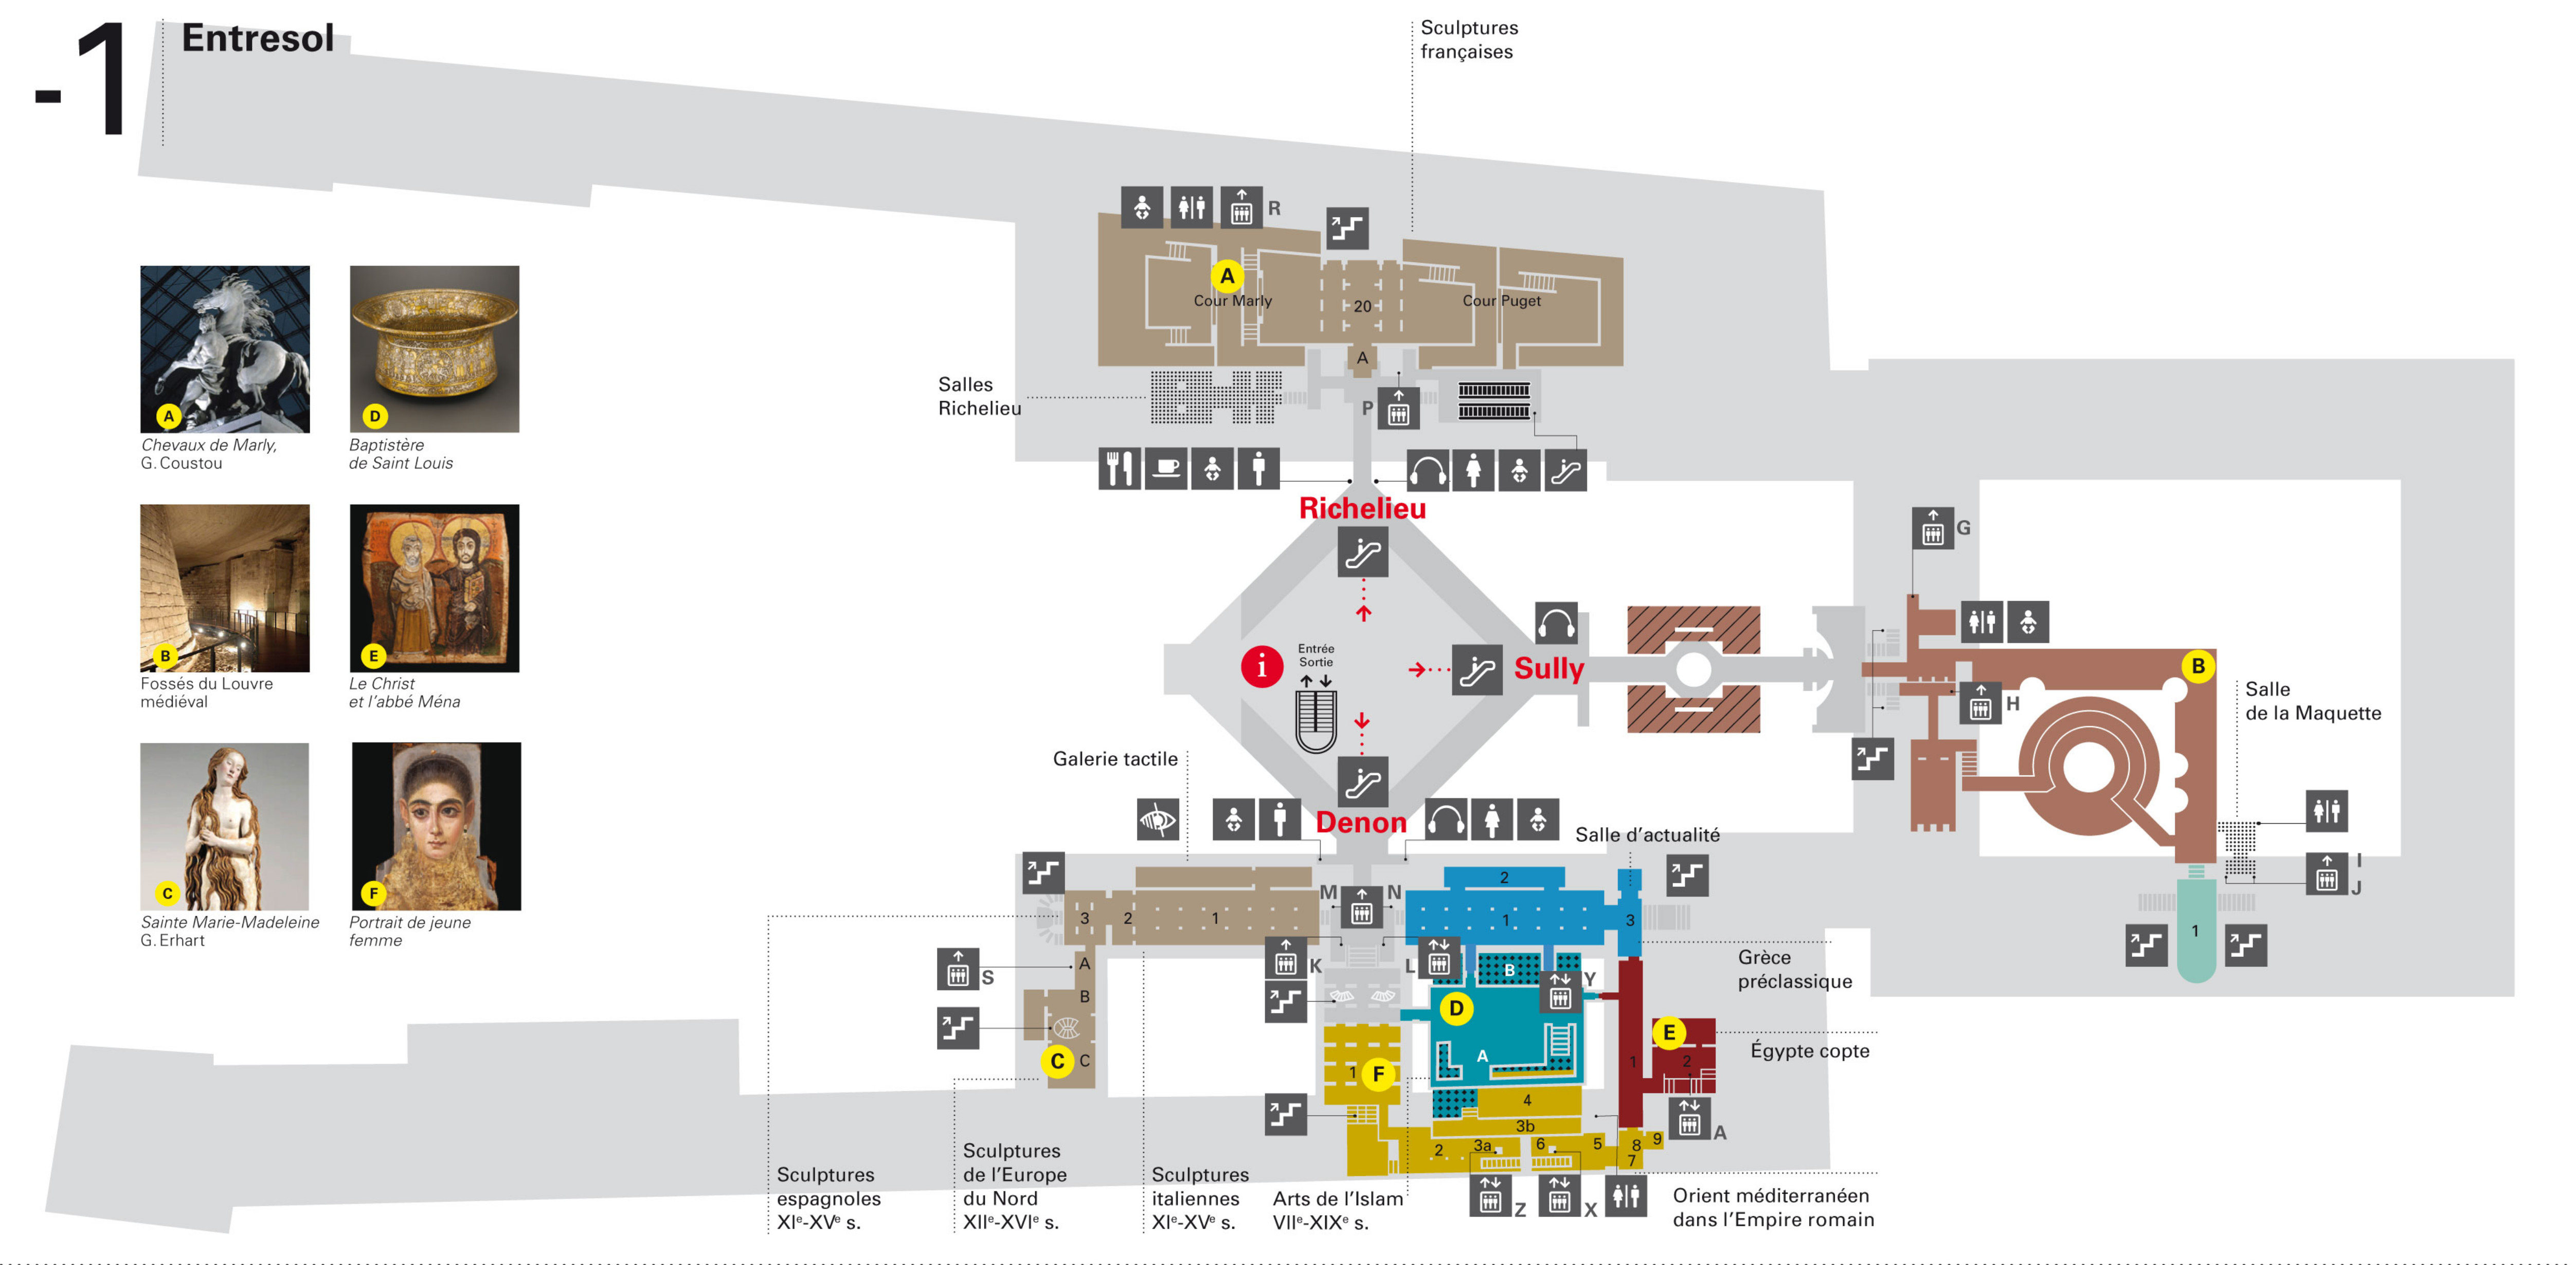 Louvre Museum Map